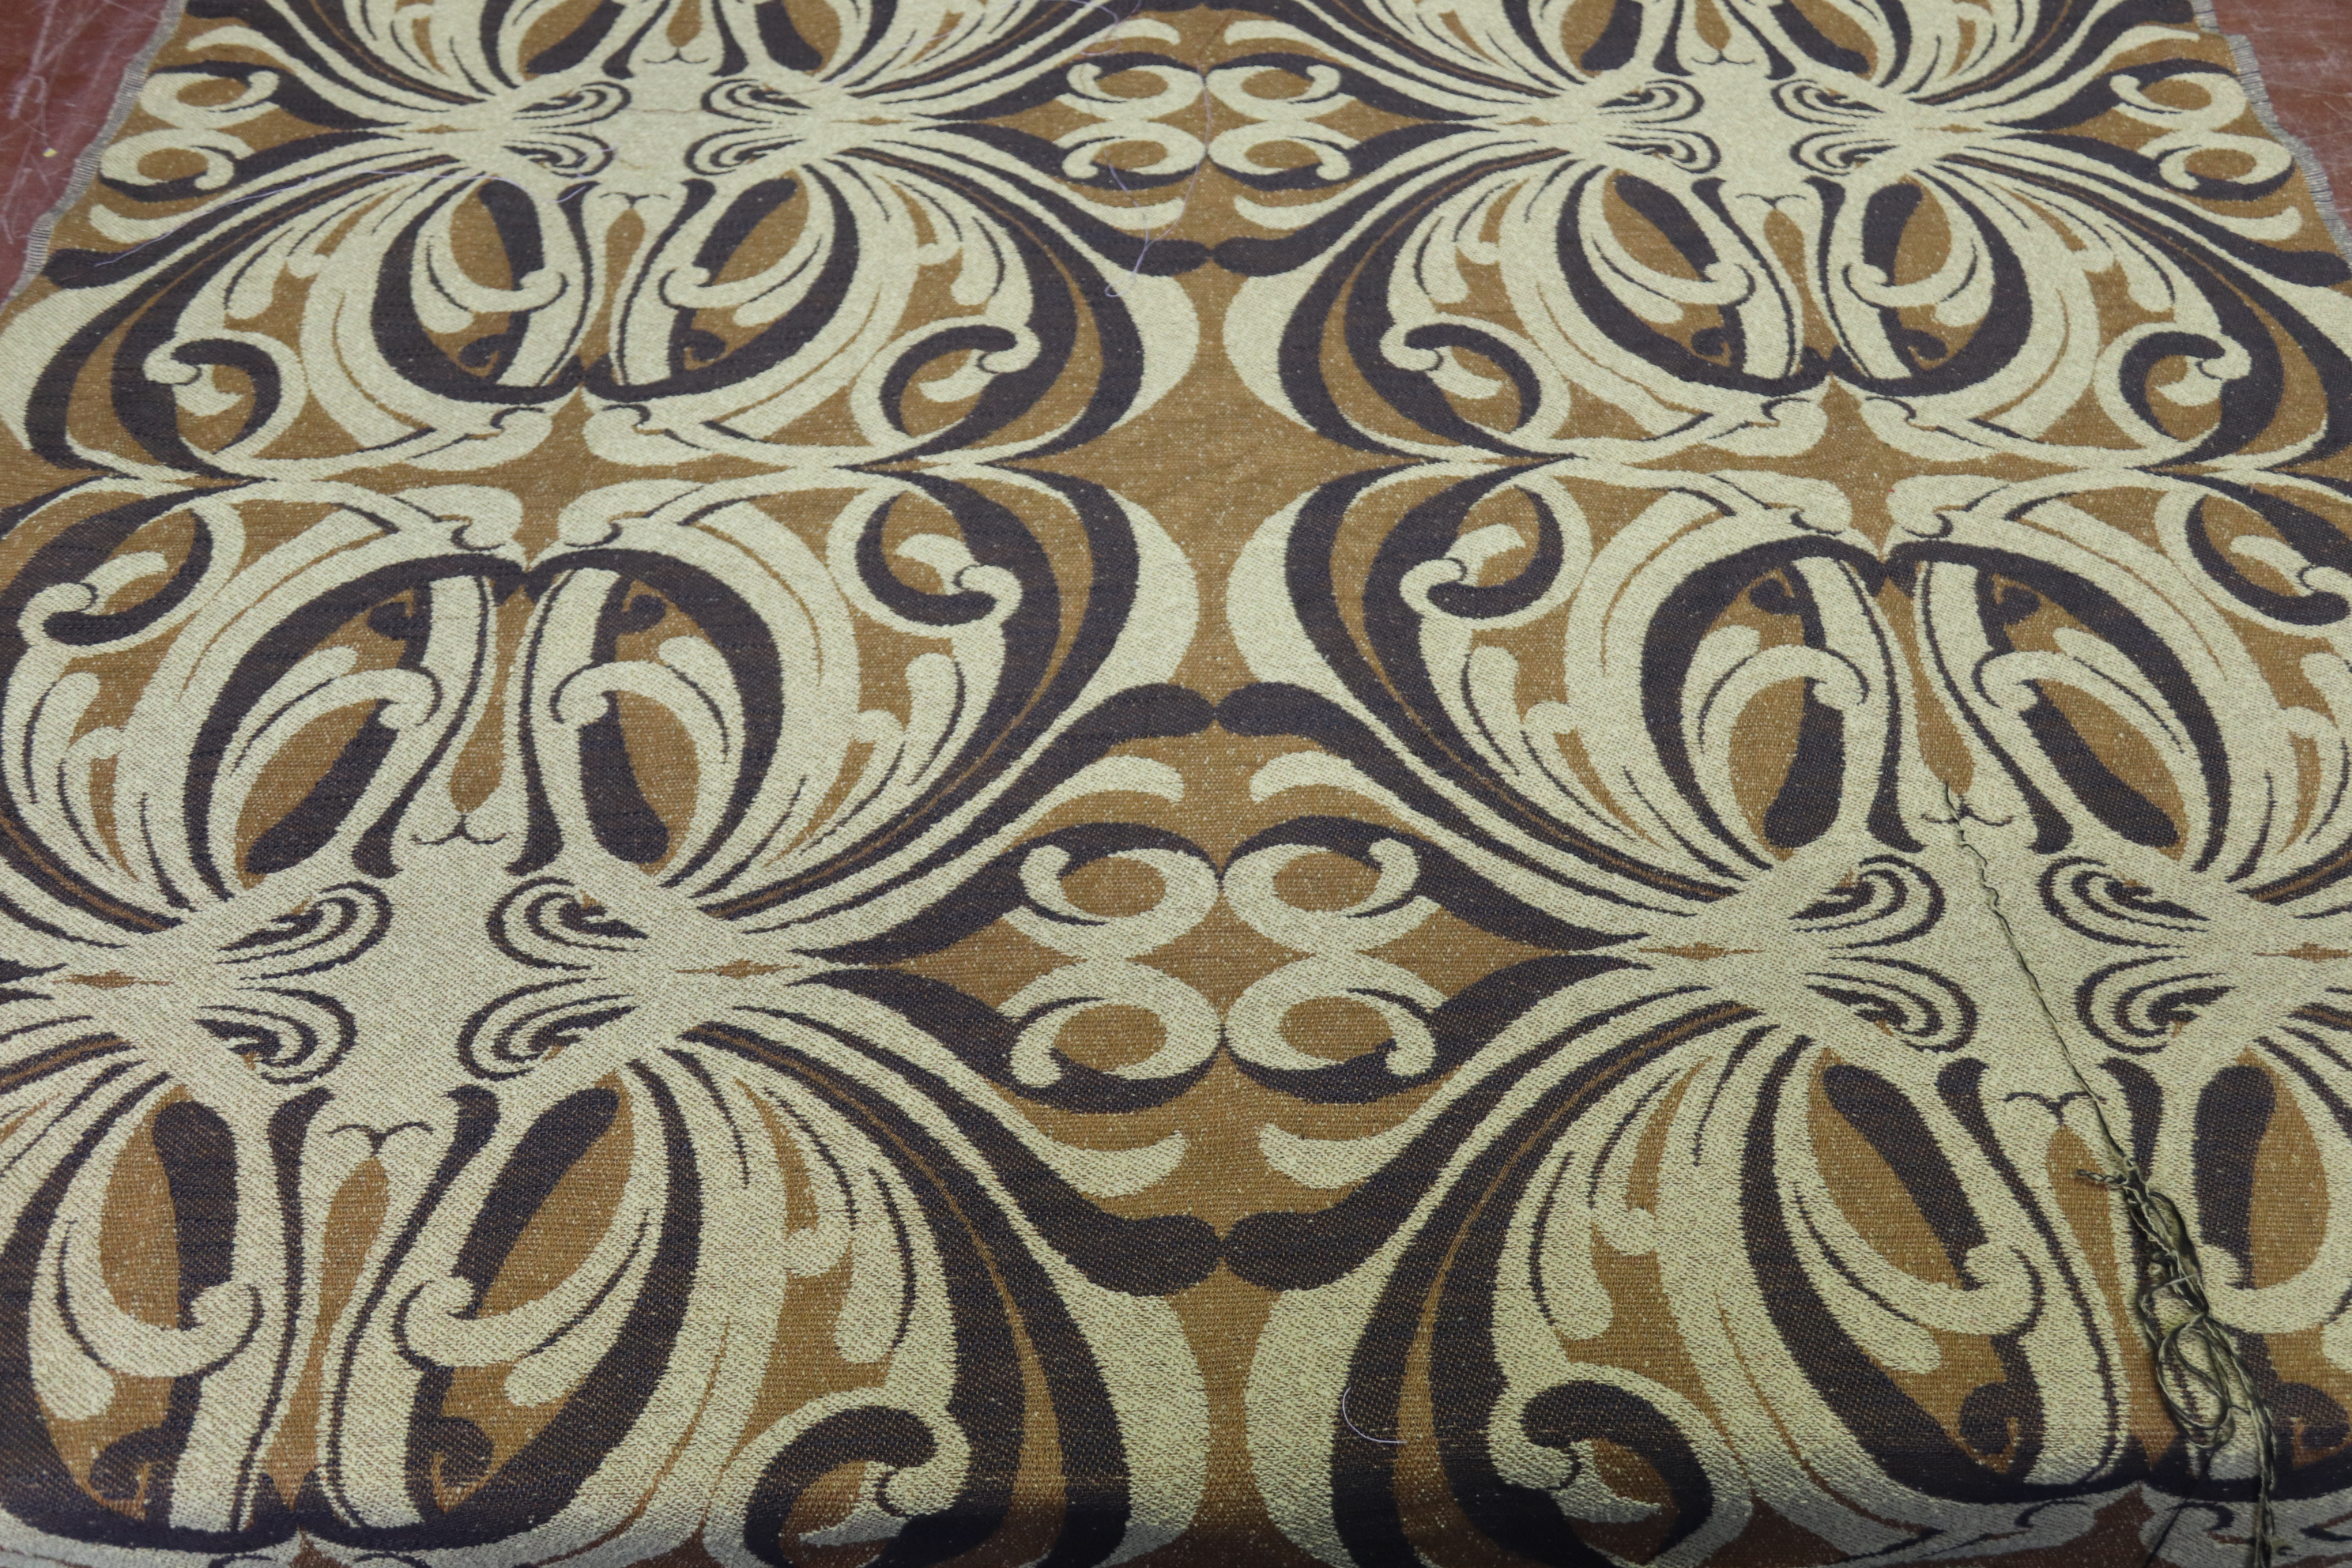 A roll of woven fabric, "Lombardy" by Edinburgh Weavers, large scrolling abstract pattern in